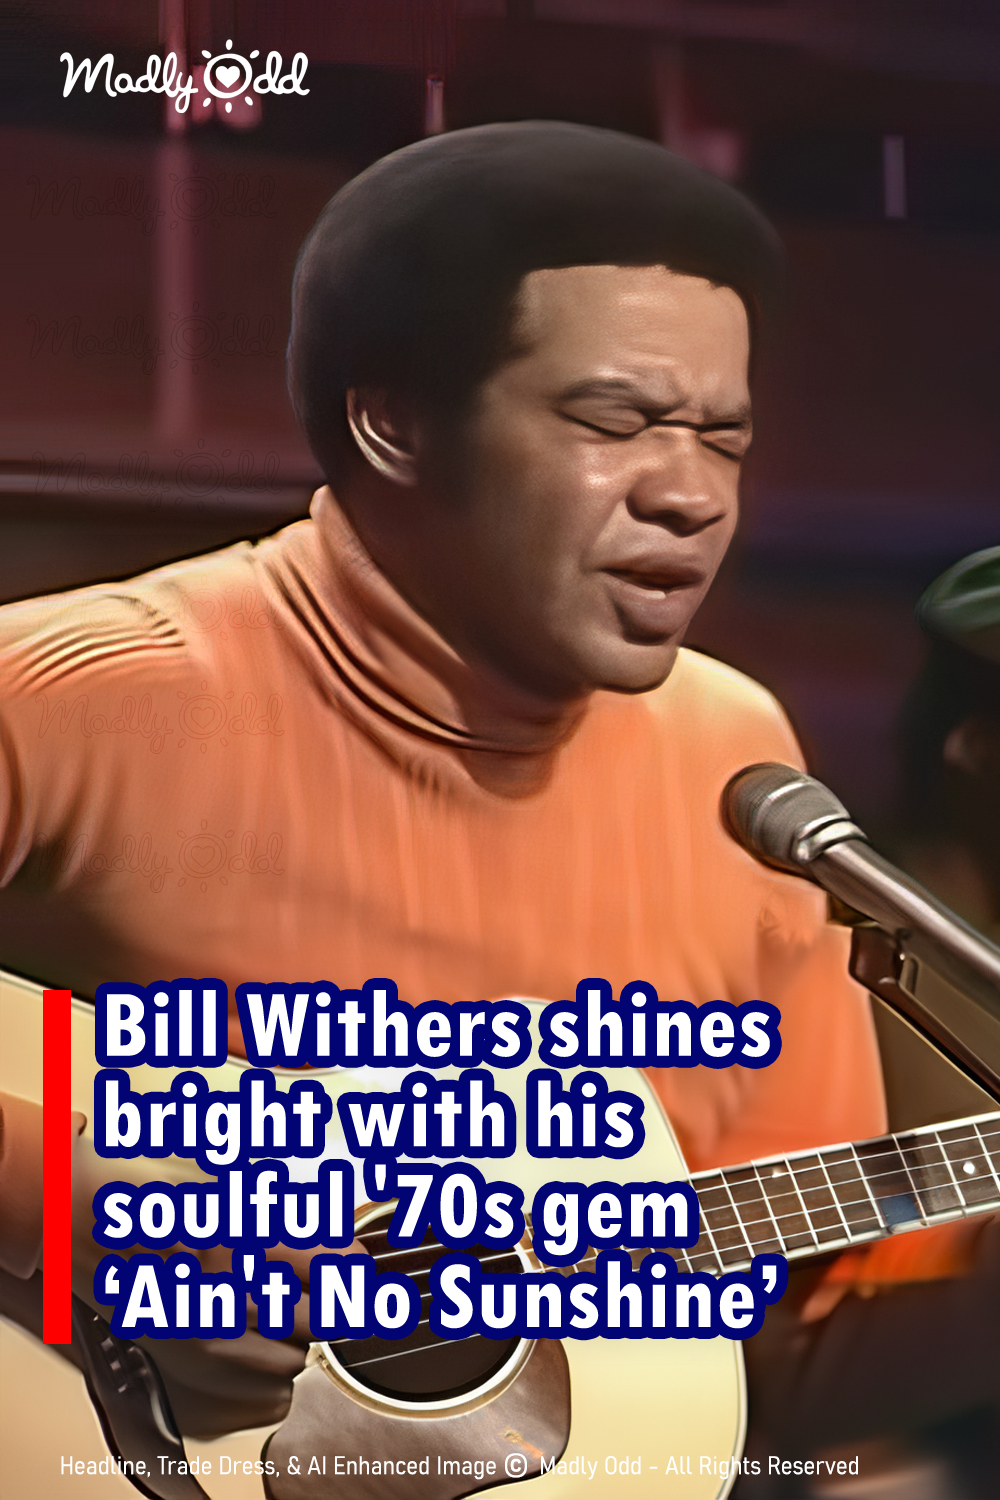 Bill Withers 1971 \'Ain\'t No Sunshine\' Continues to Haunt and Heal Hearts